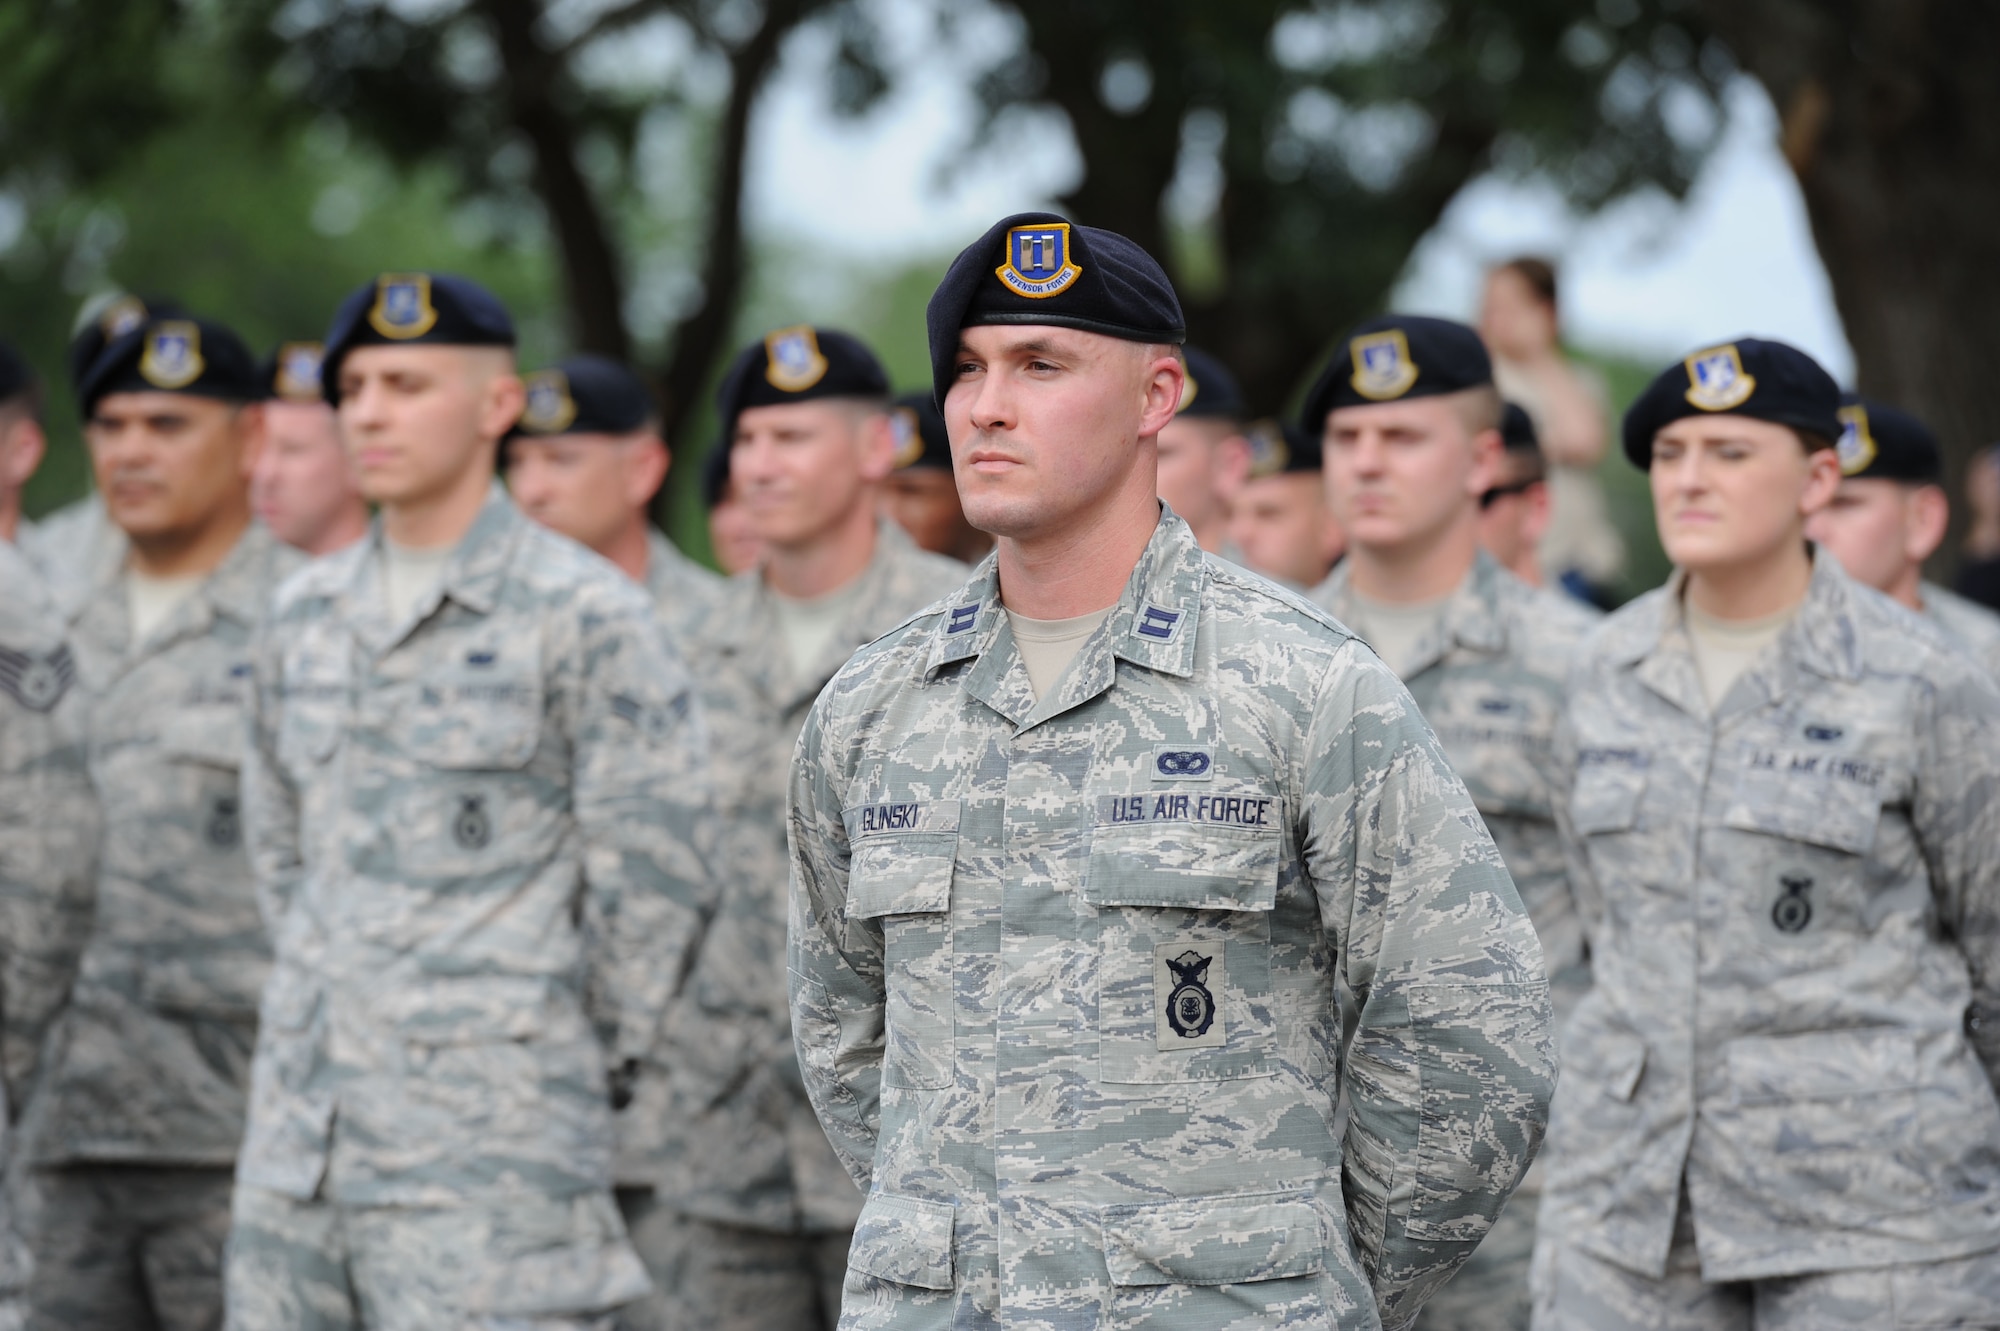 Capt. Harlan Glinski, 81st Training Wing command action group director, stands in formation during the 81st Security Forces Squadron retreat ceremony May 18, 2017, on Keesler Air Force Base, Miss. The event was held during National Police Week, which recognizes the service of law enforcement men and women who put their lives at risk every day. (U.S. Air Force photo by Kemberly Groue)